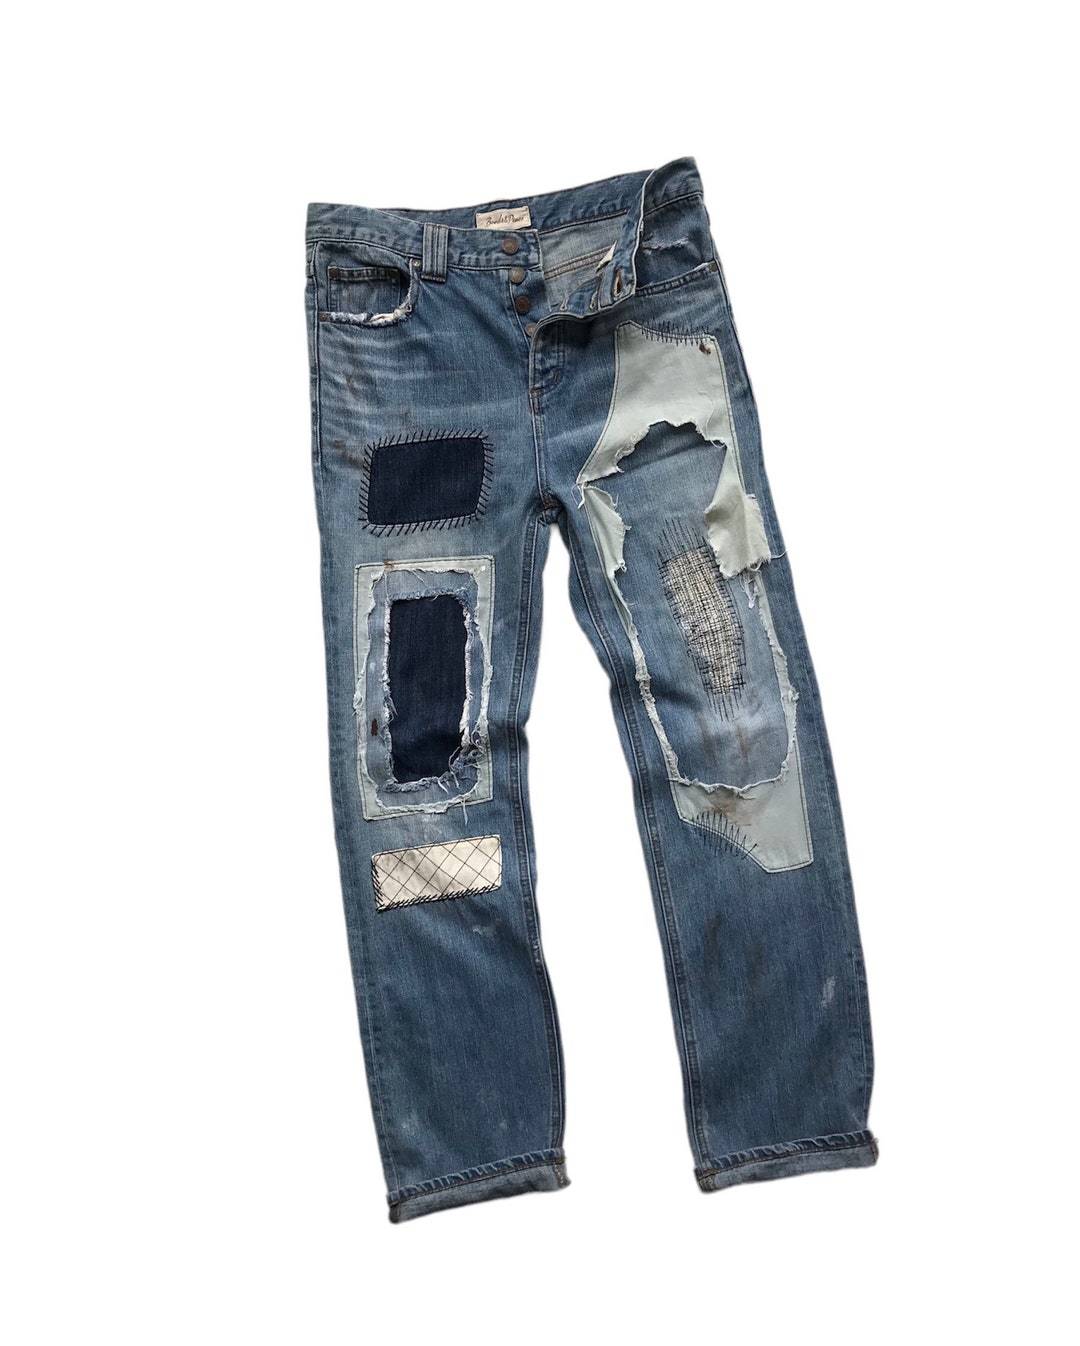 Rare Unique Vintage Patchwork Jeans Reworked Remake Artwork Frayed Ripped  Denim Patched Crazy Handmade Boro Punk Pant Retro Old Fashion W 34 